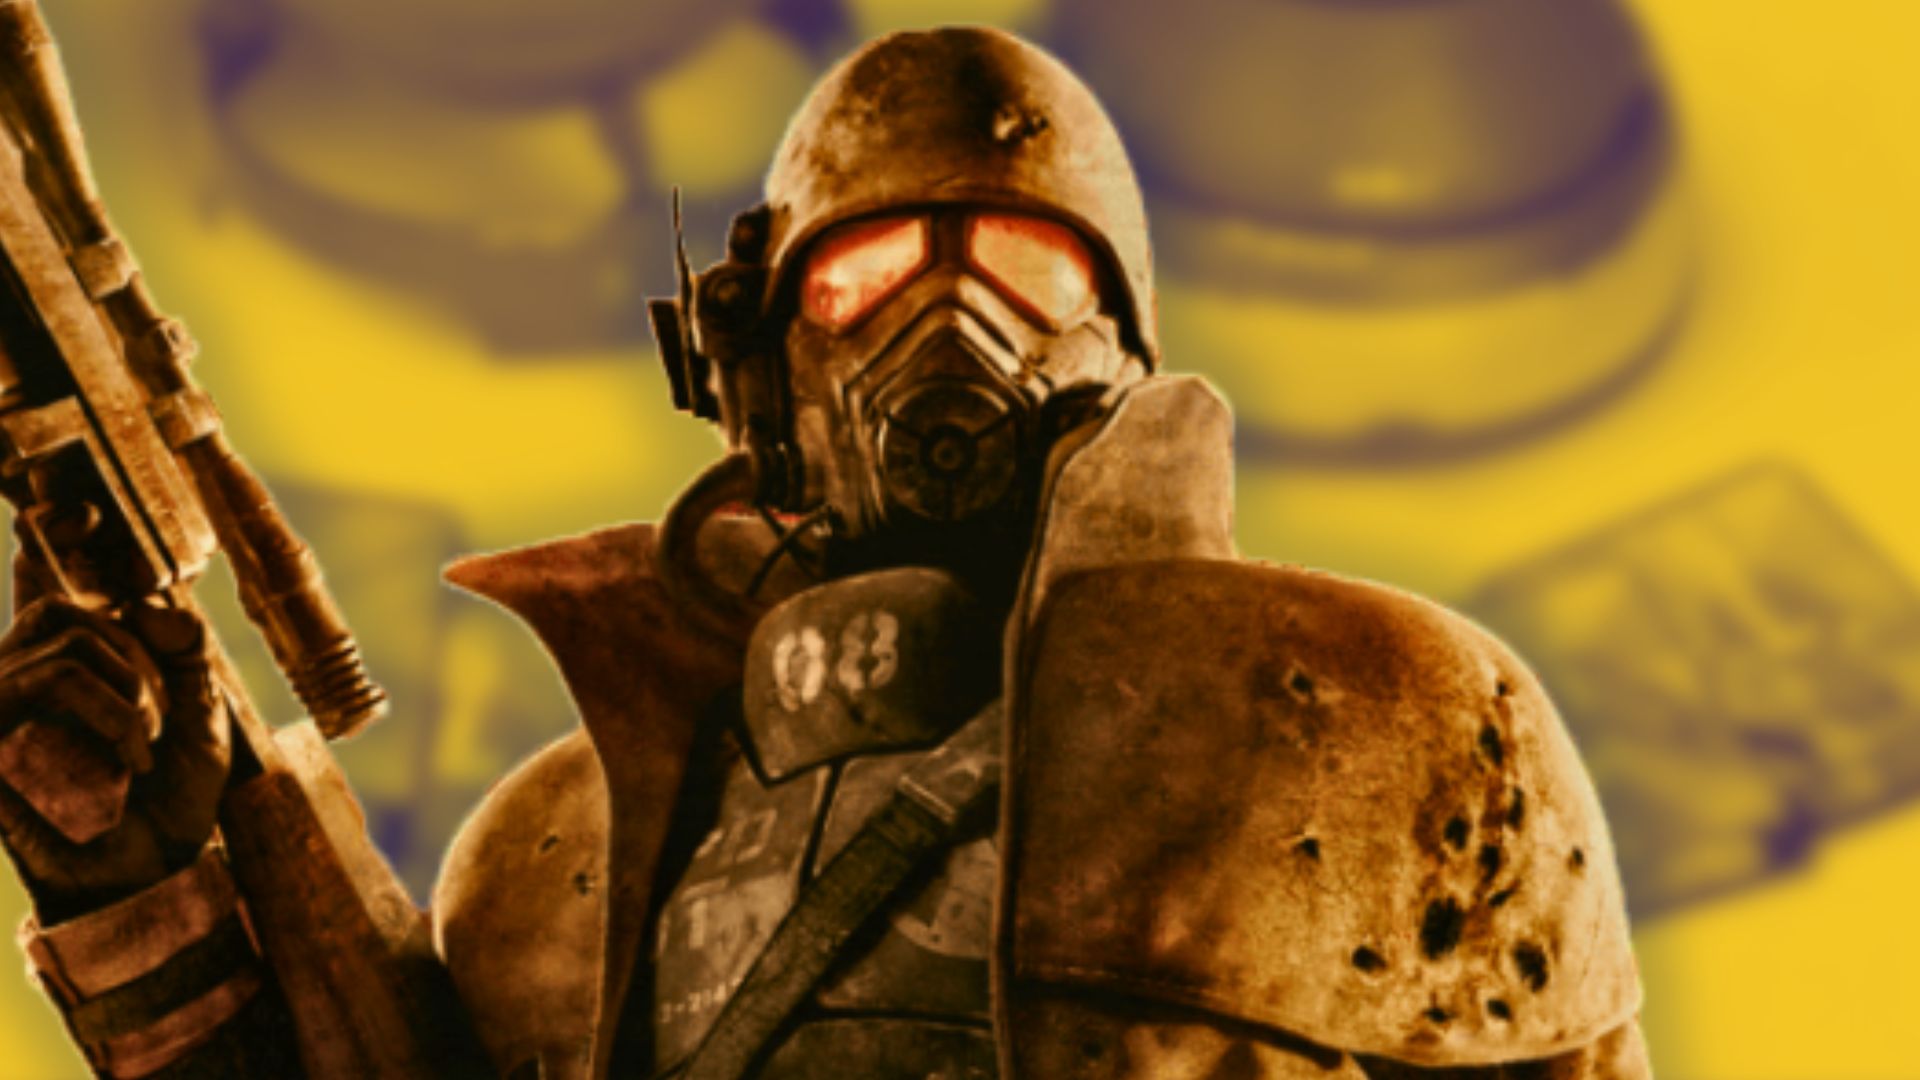 Bethesda reveals huge Fallout Anthology collection ahead of TV series